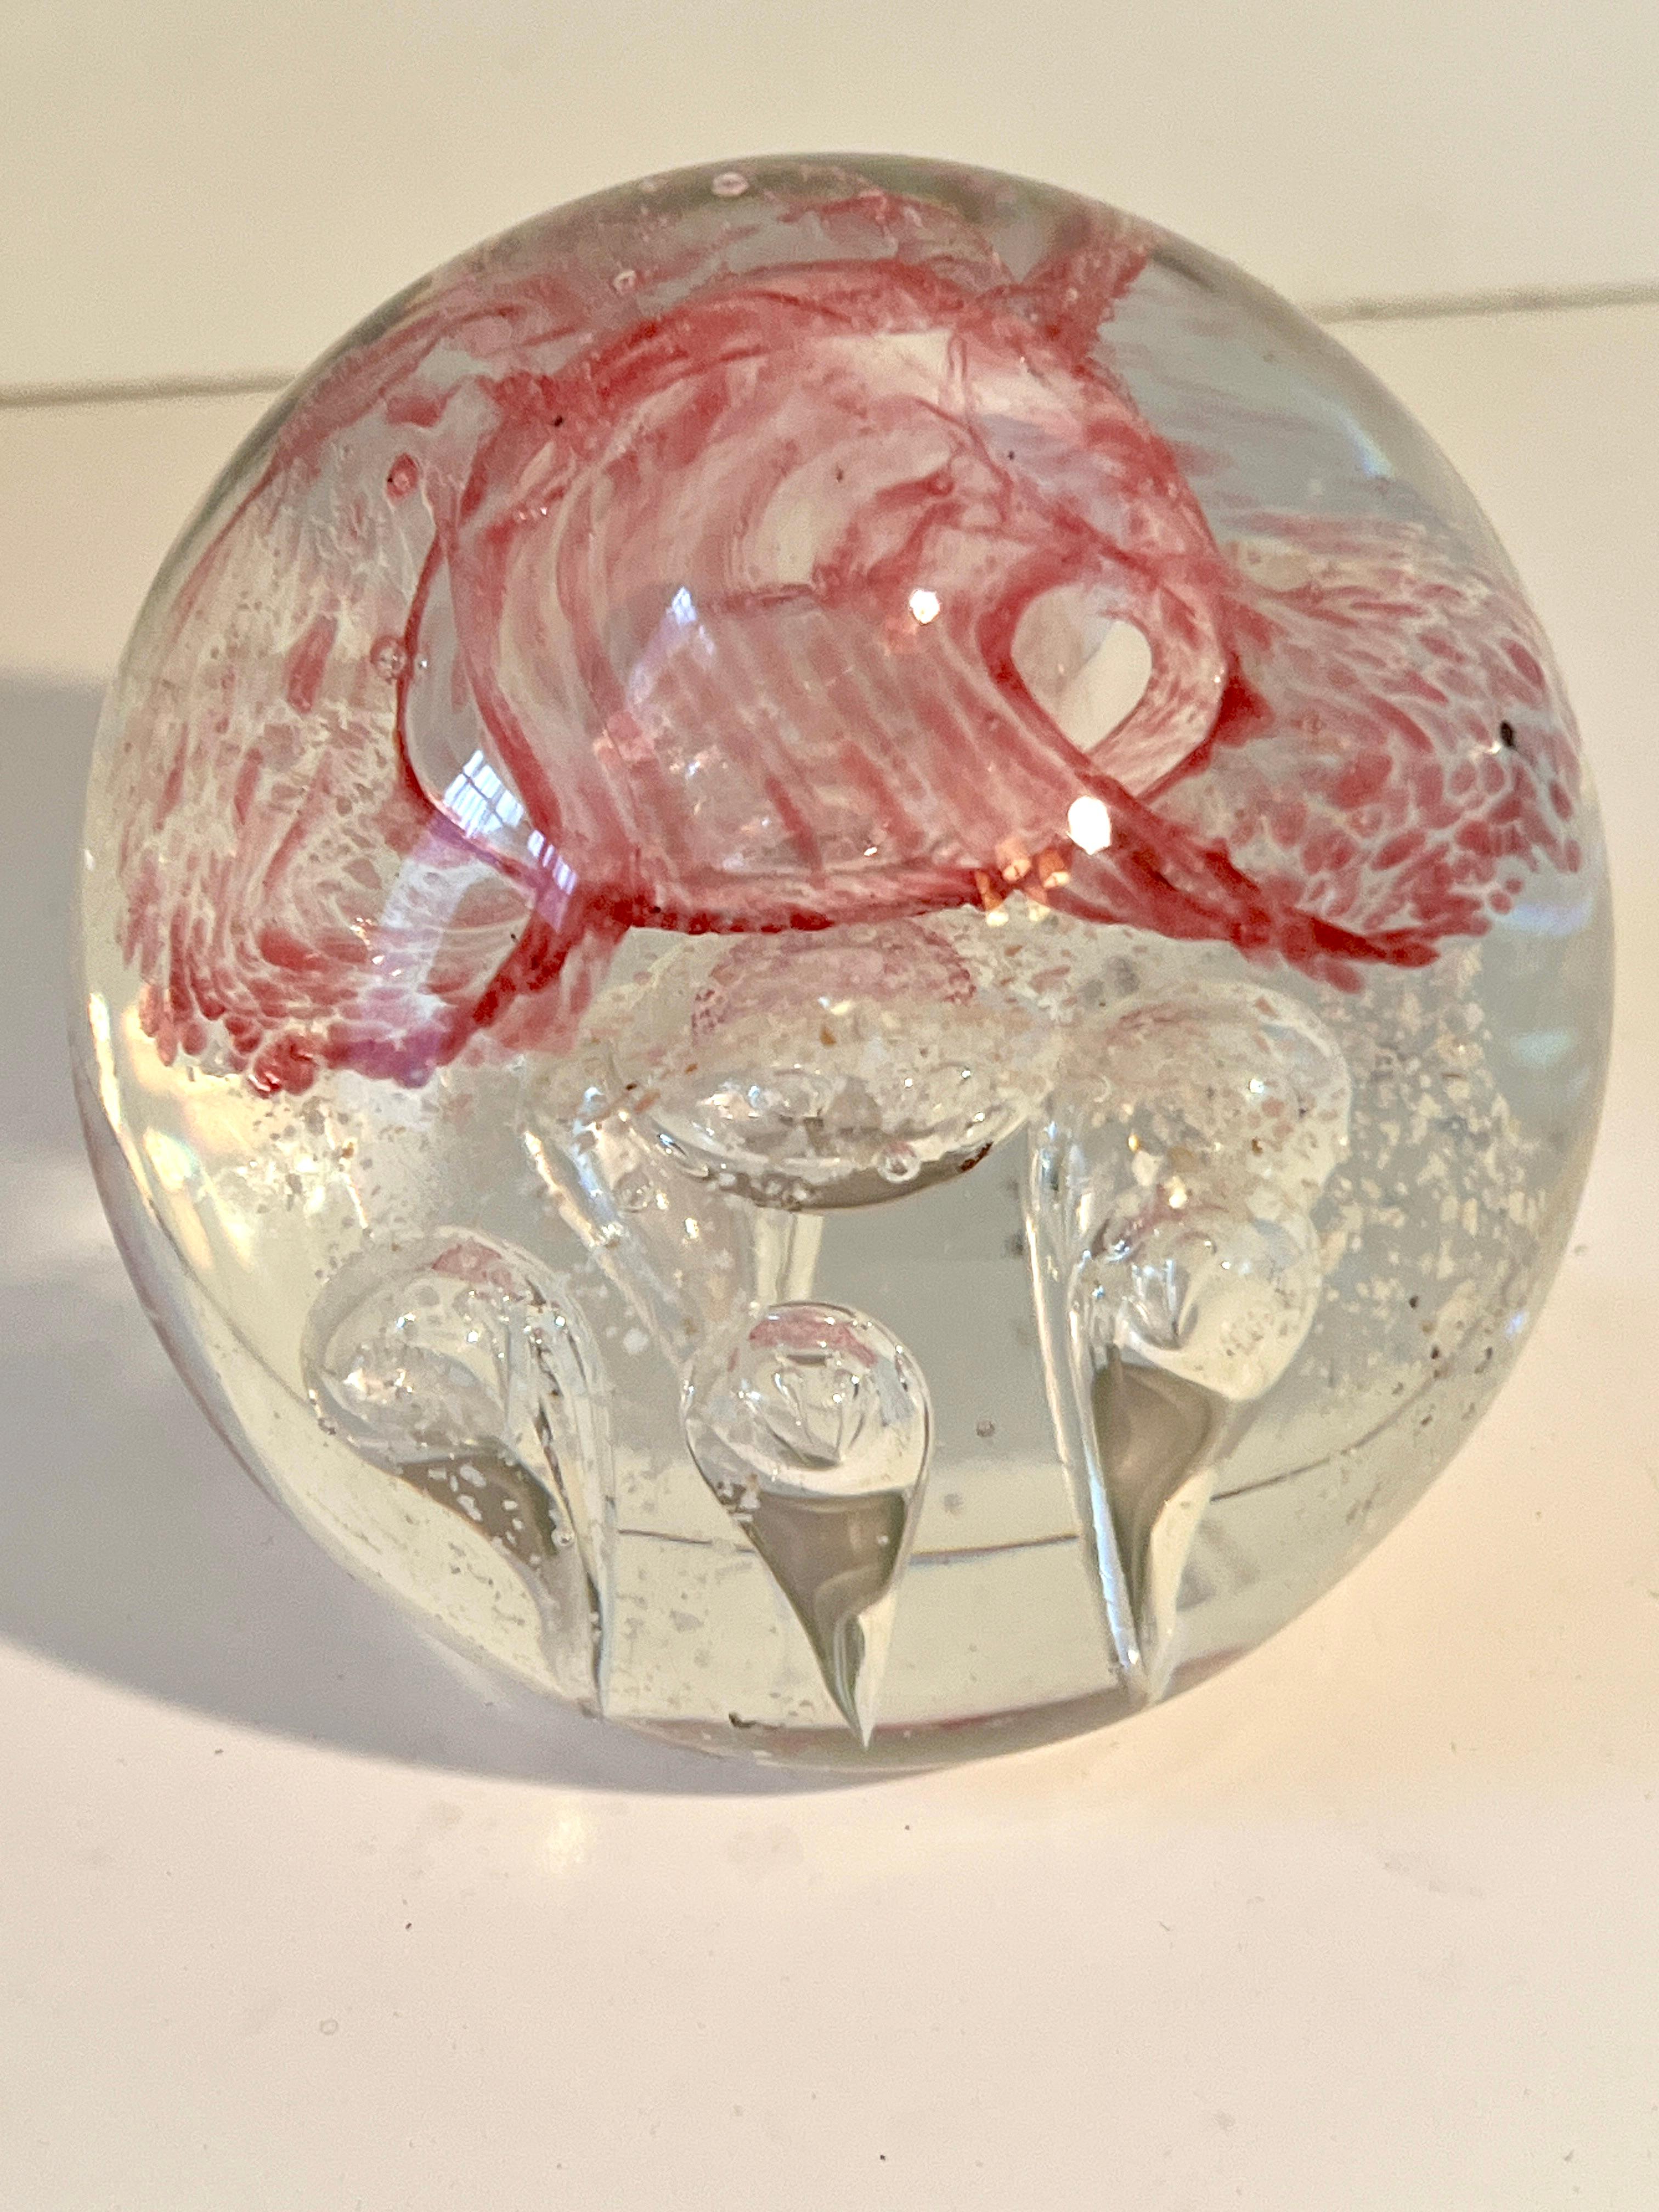 A beautiful large glass paper weight with large bubbles throughout, many symmetrical and a lovely red ribbon spiraling inside.

A compliment to any desk, work station or as a decorative item on a cocktail table.  The piece is also heavy enough to be